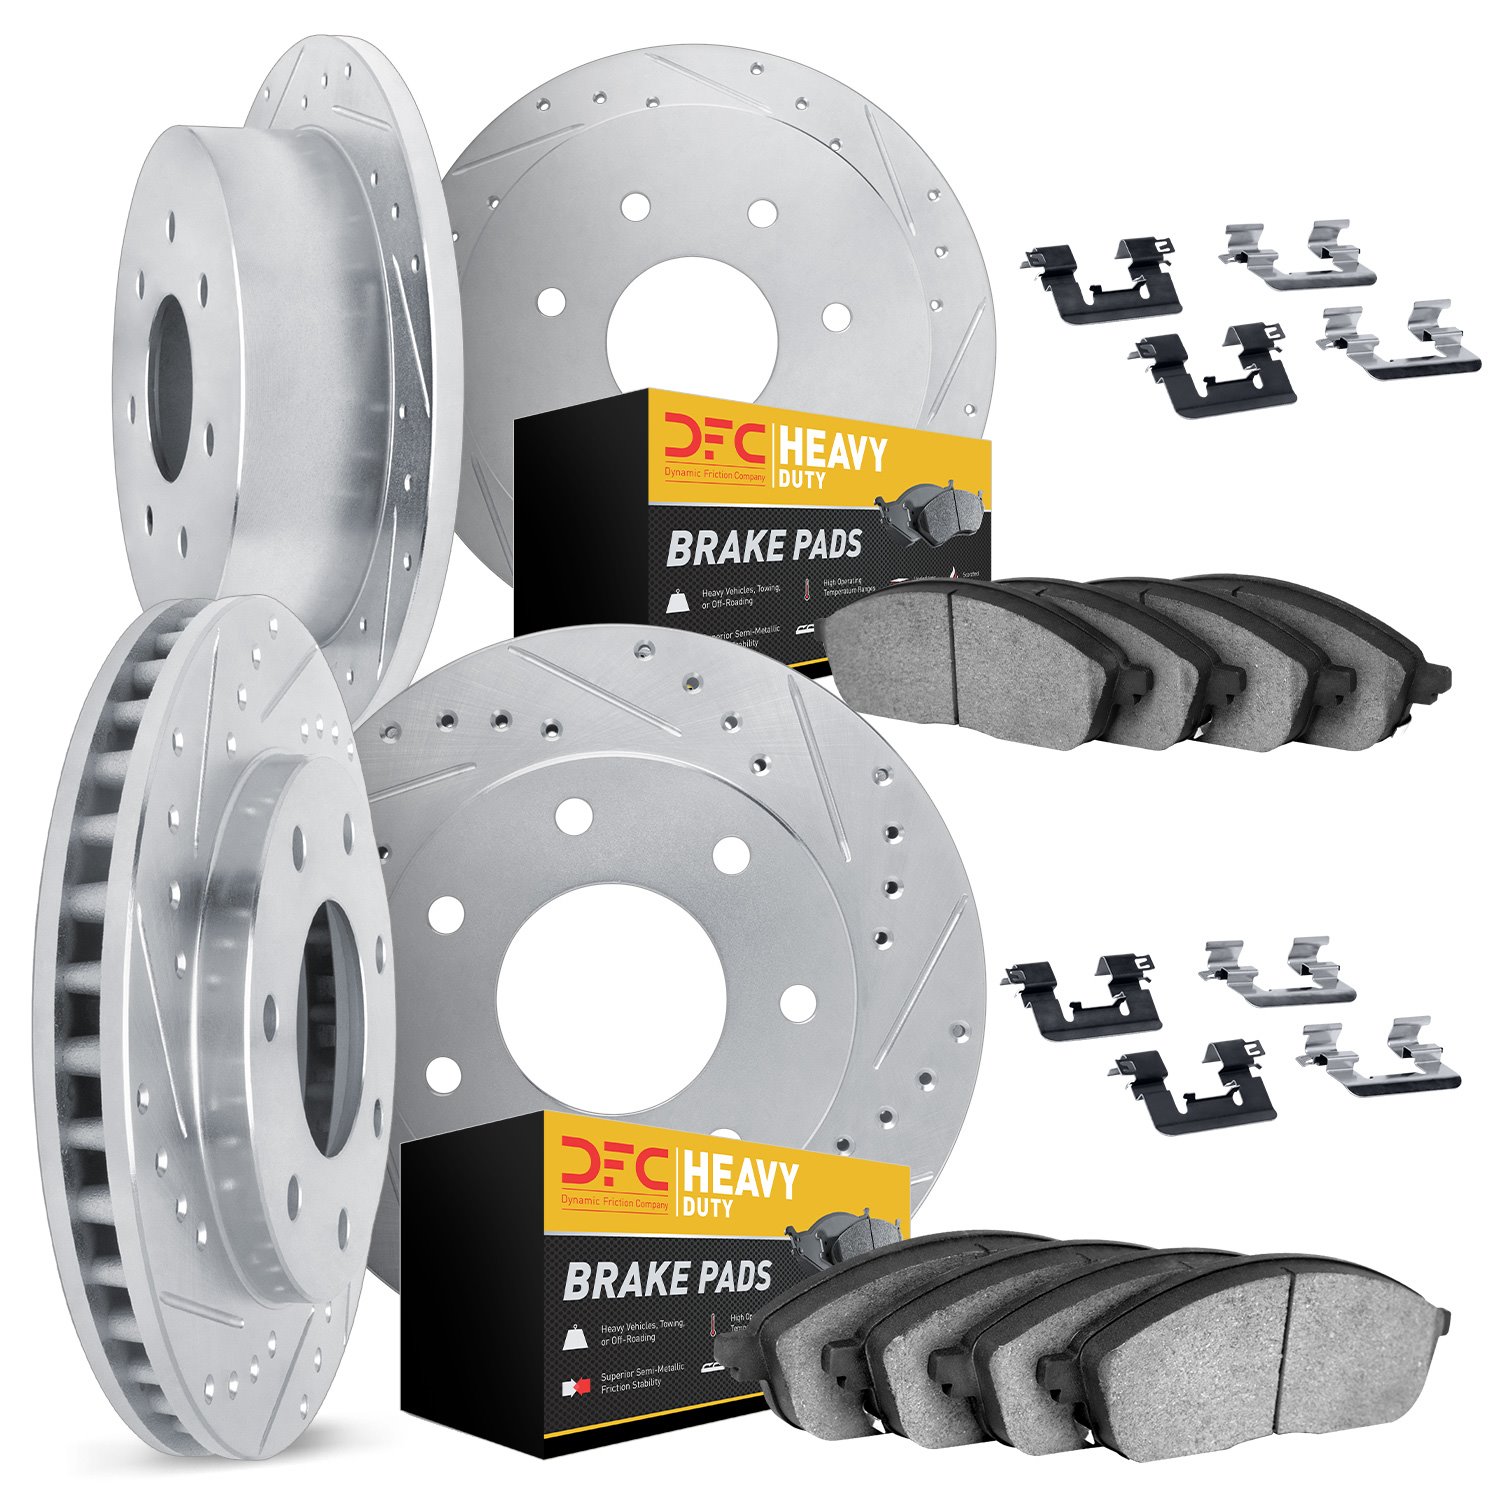 7214-54032 Drilled/Slotted Rotors w/Heavy-Duty Brake Pads Kit & Hardware [Silver], 1997-2004 Ford/Lincoln/Mercury/Mazda, Positio